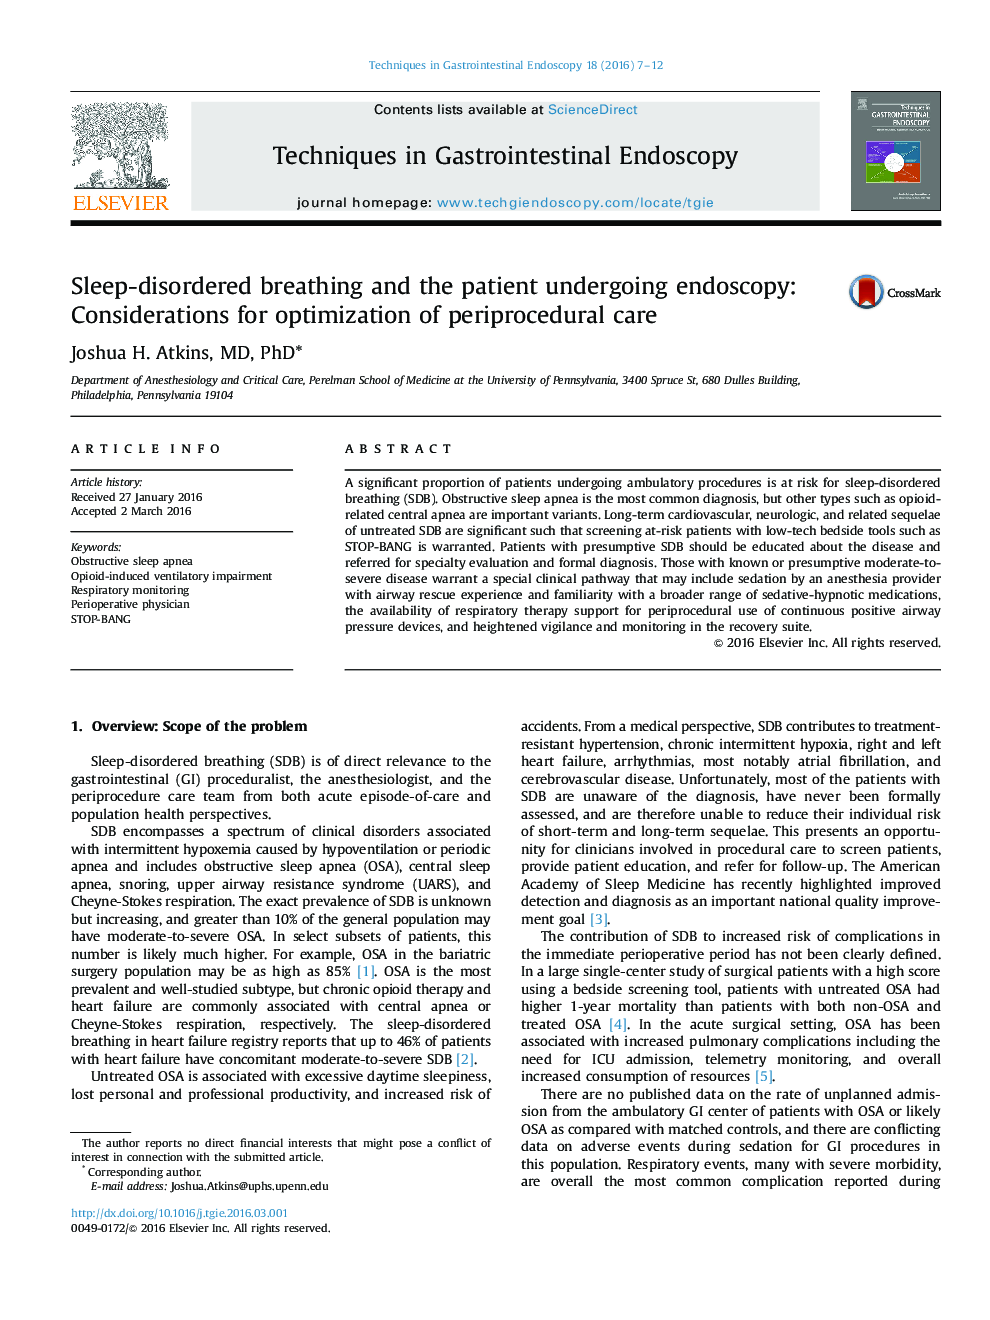 Sleep-disordered breathing and the patient undergoing endoscopy: Considerations for optimization of periprocedural care 